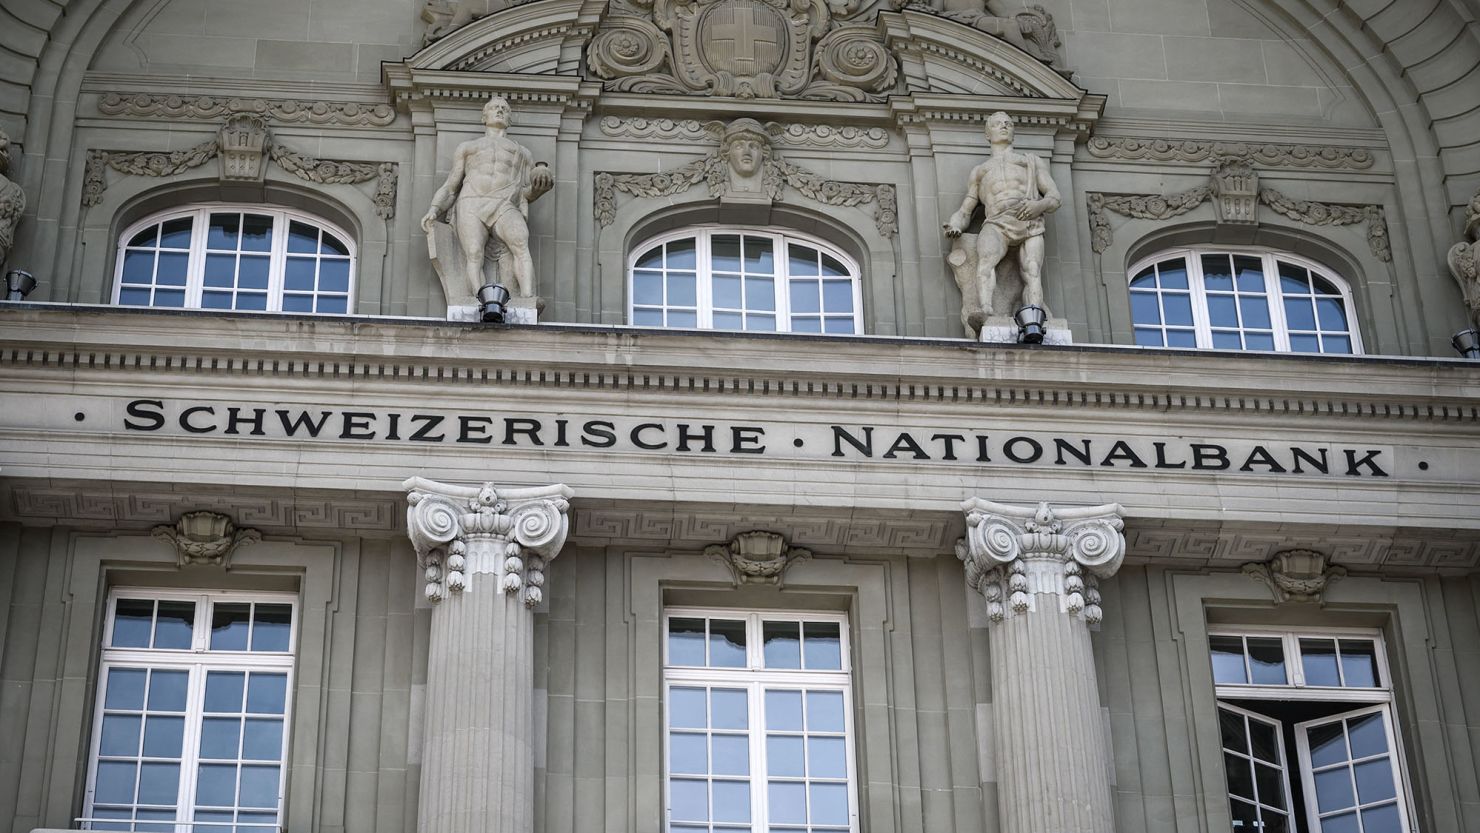 The building of the Swiss National Bank in Bern, pictured in April 2019.